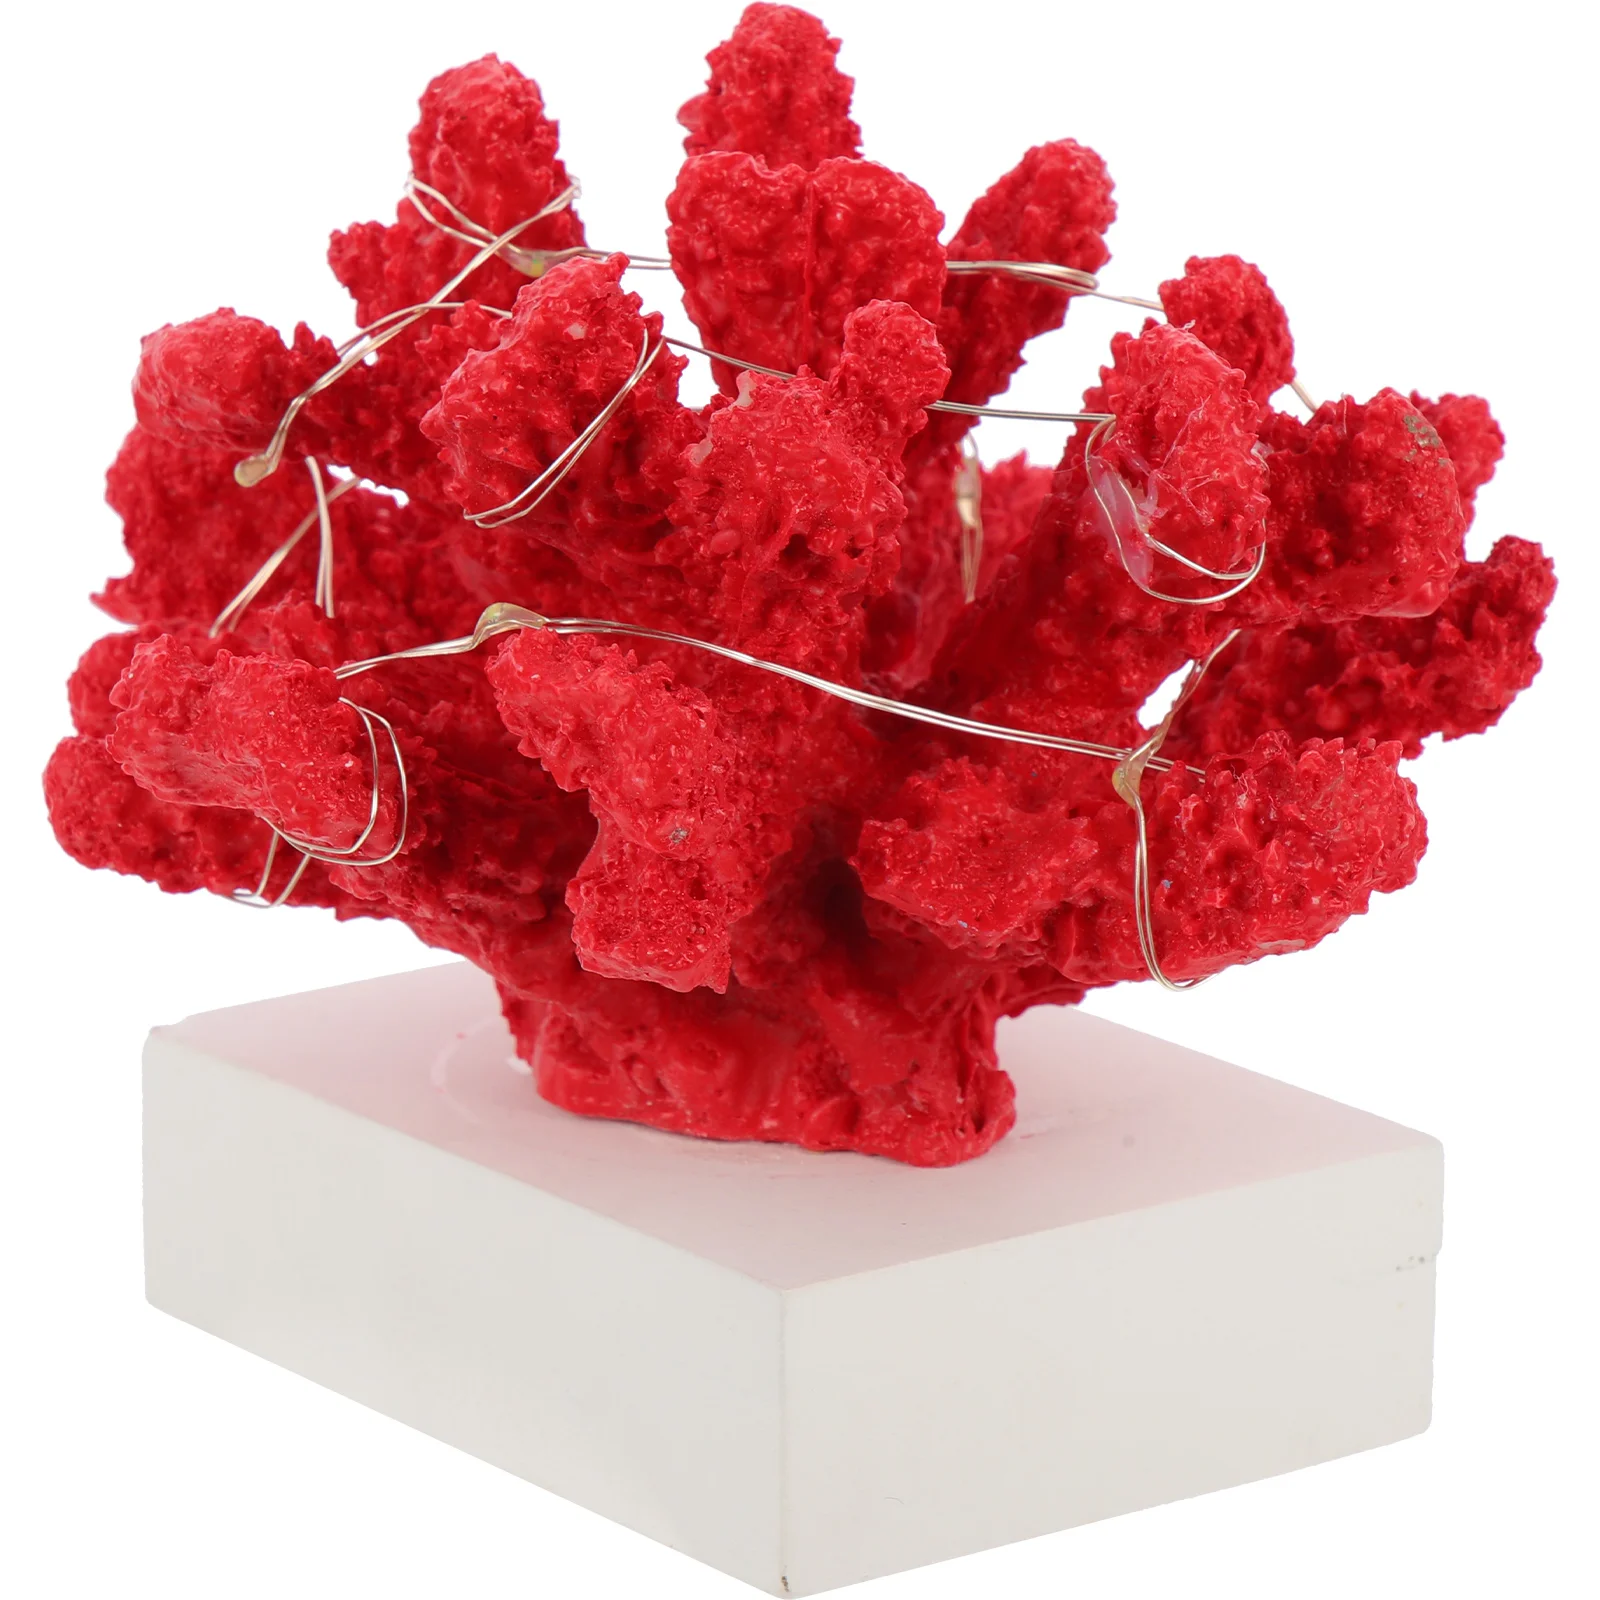 

Glowing Coral Figurine Vivid Coral Decor Simulated Coral Ornament Office Supply